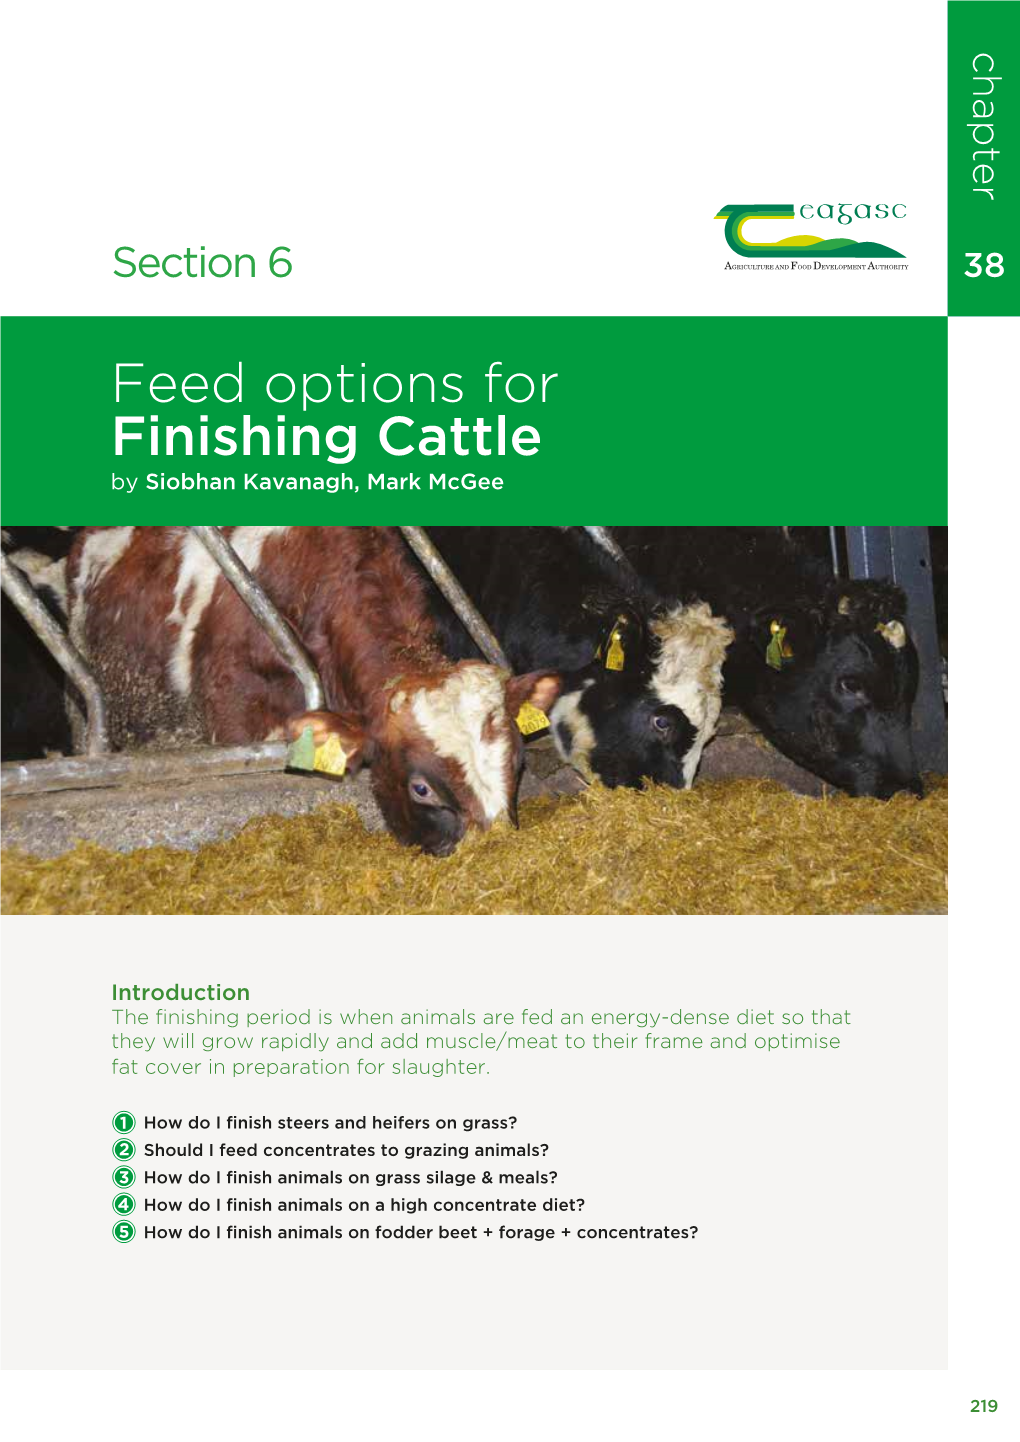 Feed Options for Finishing Cattle by Siobhan Kavanagh, Mark Mcgee